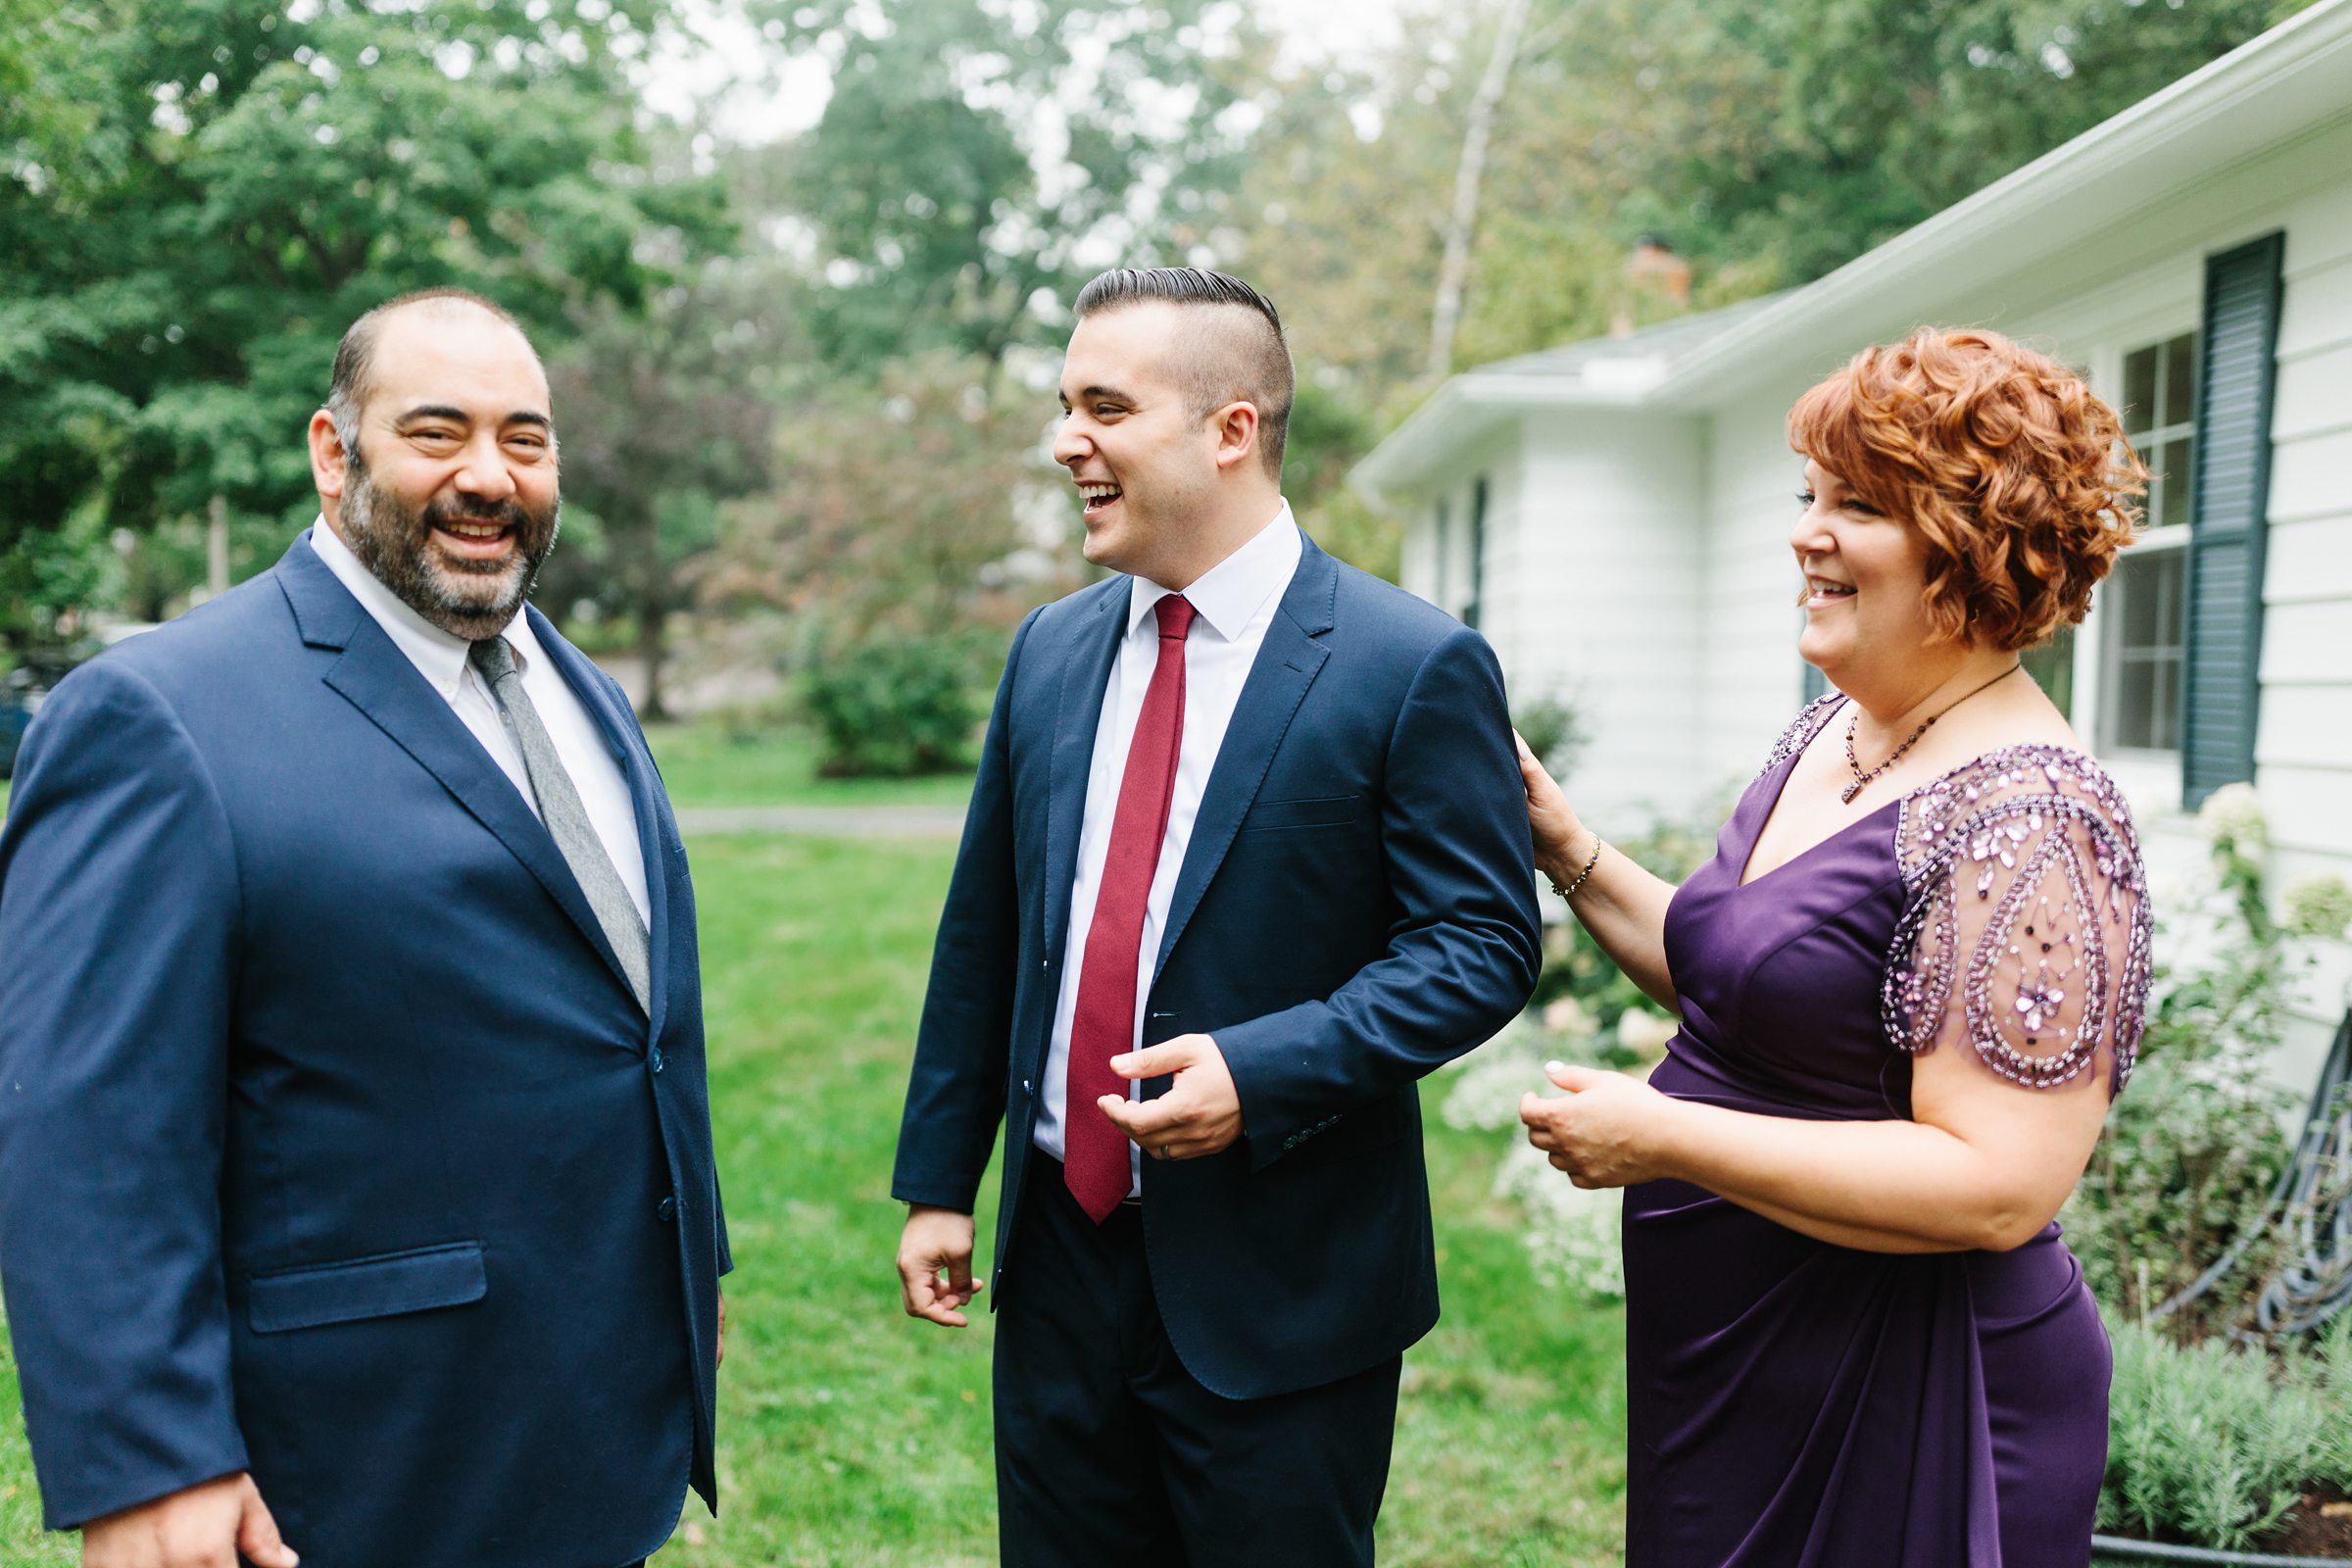 Groom is laughing surrounded by loved ones outside a house for the Ann Arbor intimate wedding by Detroit Wedding Photographer Michele Maloney